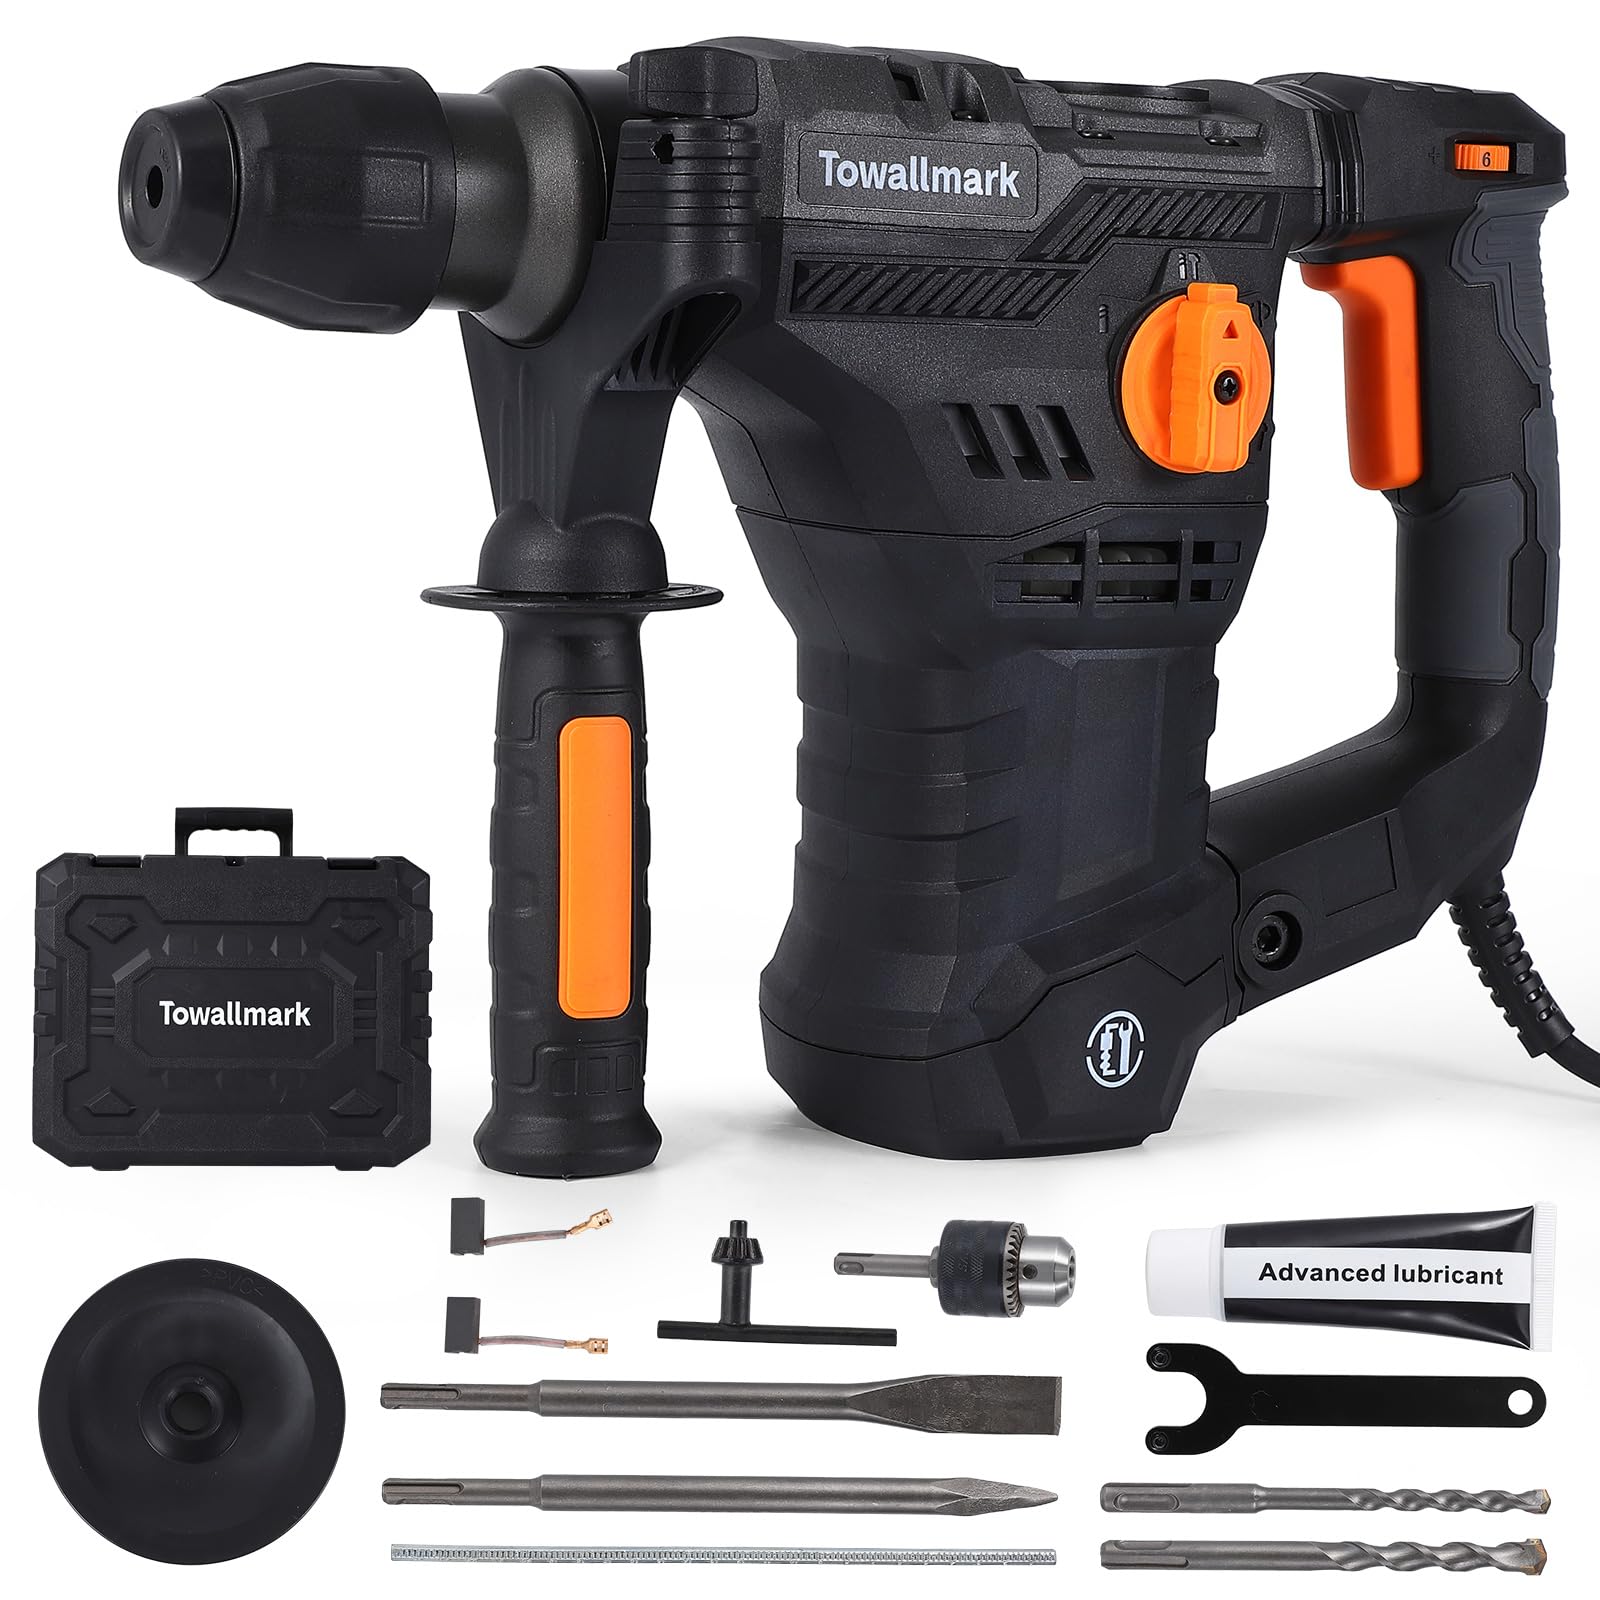 [Upgraded] 12.3 Amp Rotary Hammer Drill, 1-1/4 Inch SDS-Plus 4 in 1 Multi-functional Heavy Duty hammer drill, Safety Clutch, Drill Chuck, for Concrete, Tile, Wall, Stones, Cement and Metal